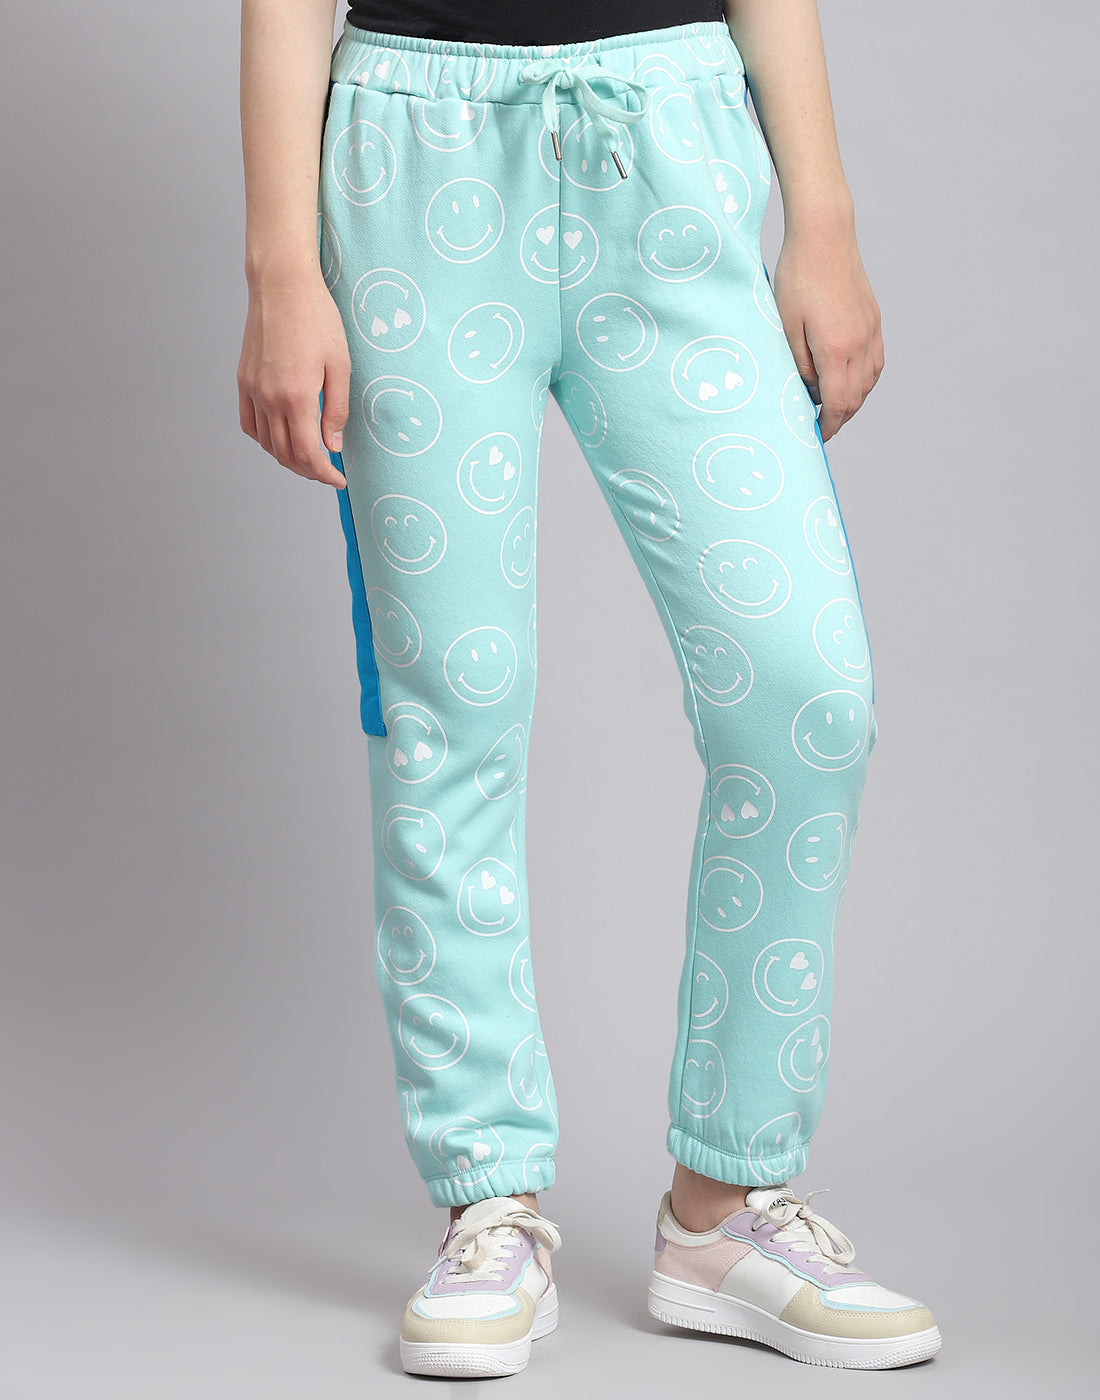 Girls Turquoise Blue Printed Hooded Full Sleeve Cords Set